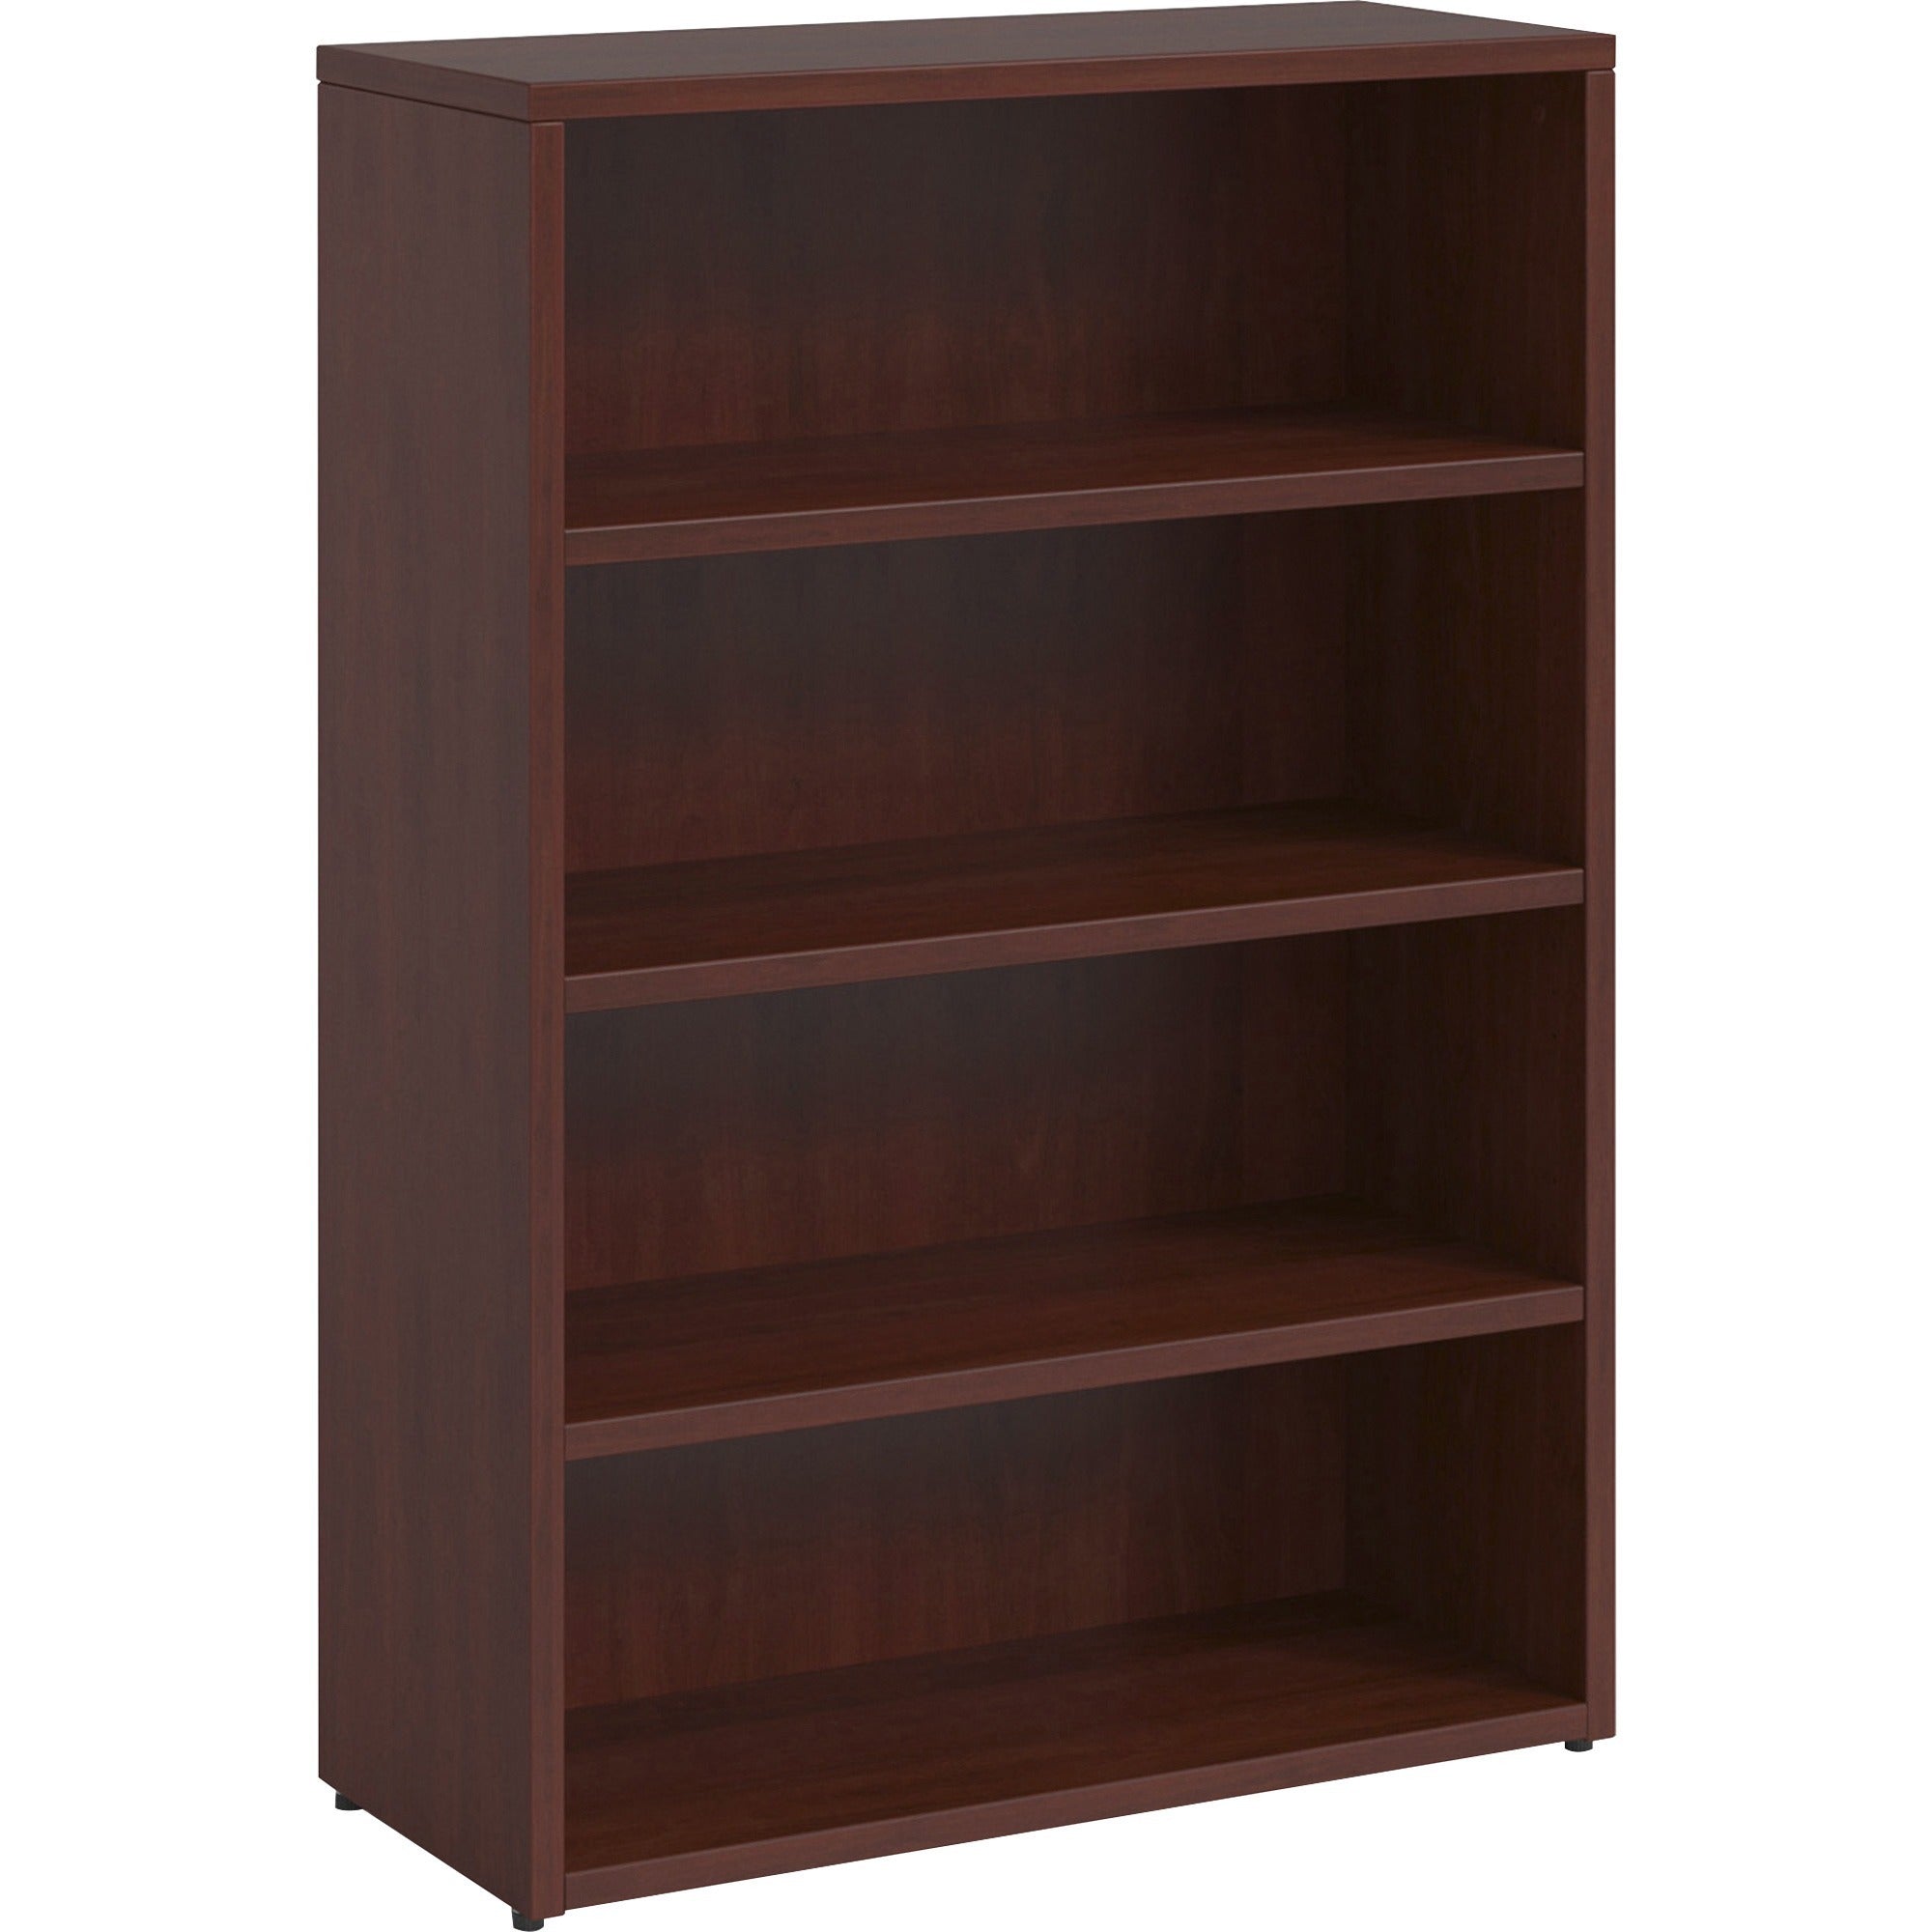 lorell-prominence-20-bookcase-34-x-1248--1-top-3-shelves-band-edge-material-particleboard-finish-laminate_llrpbk3448my - 1